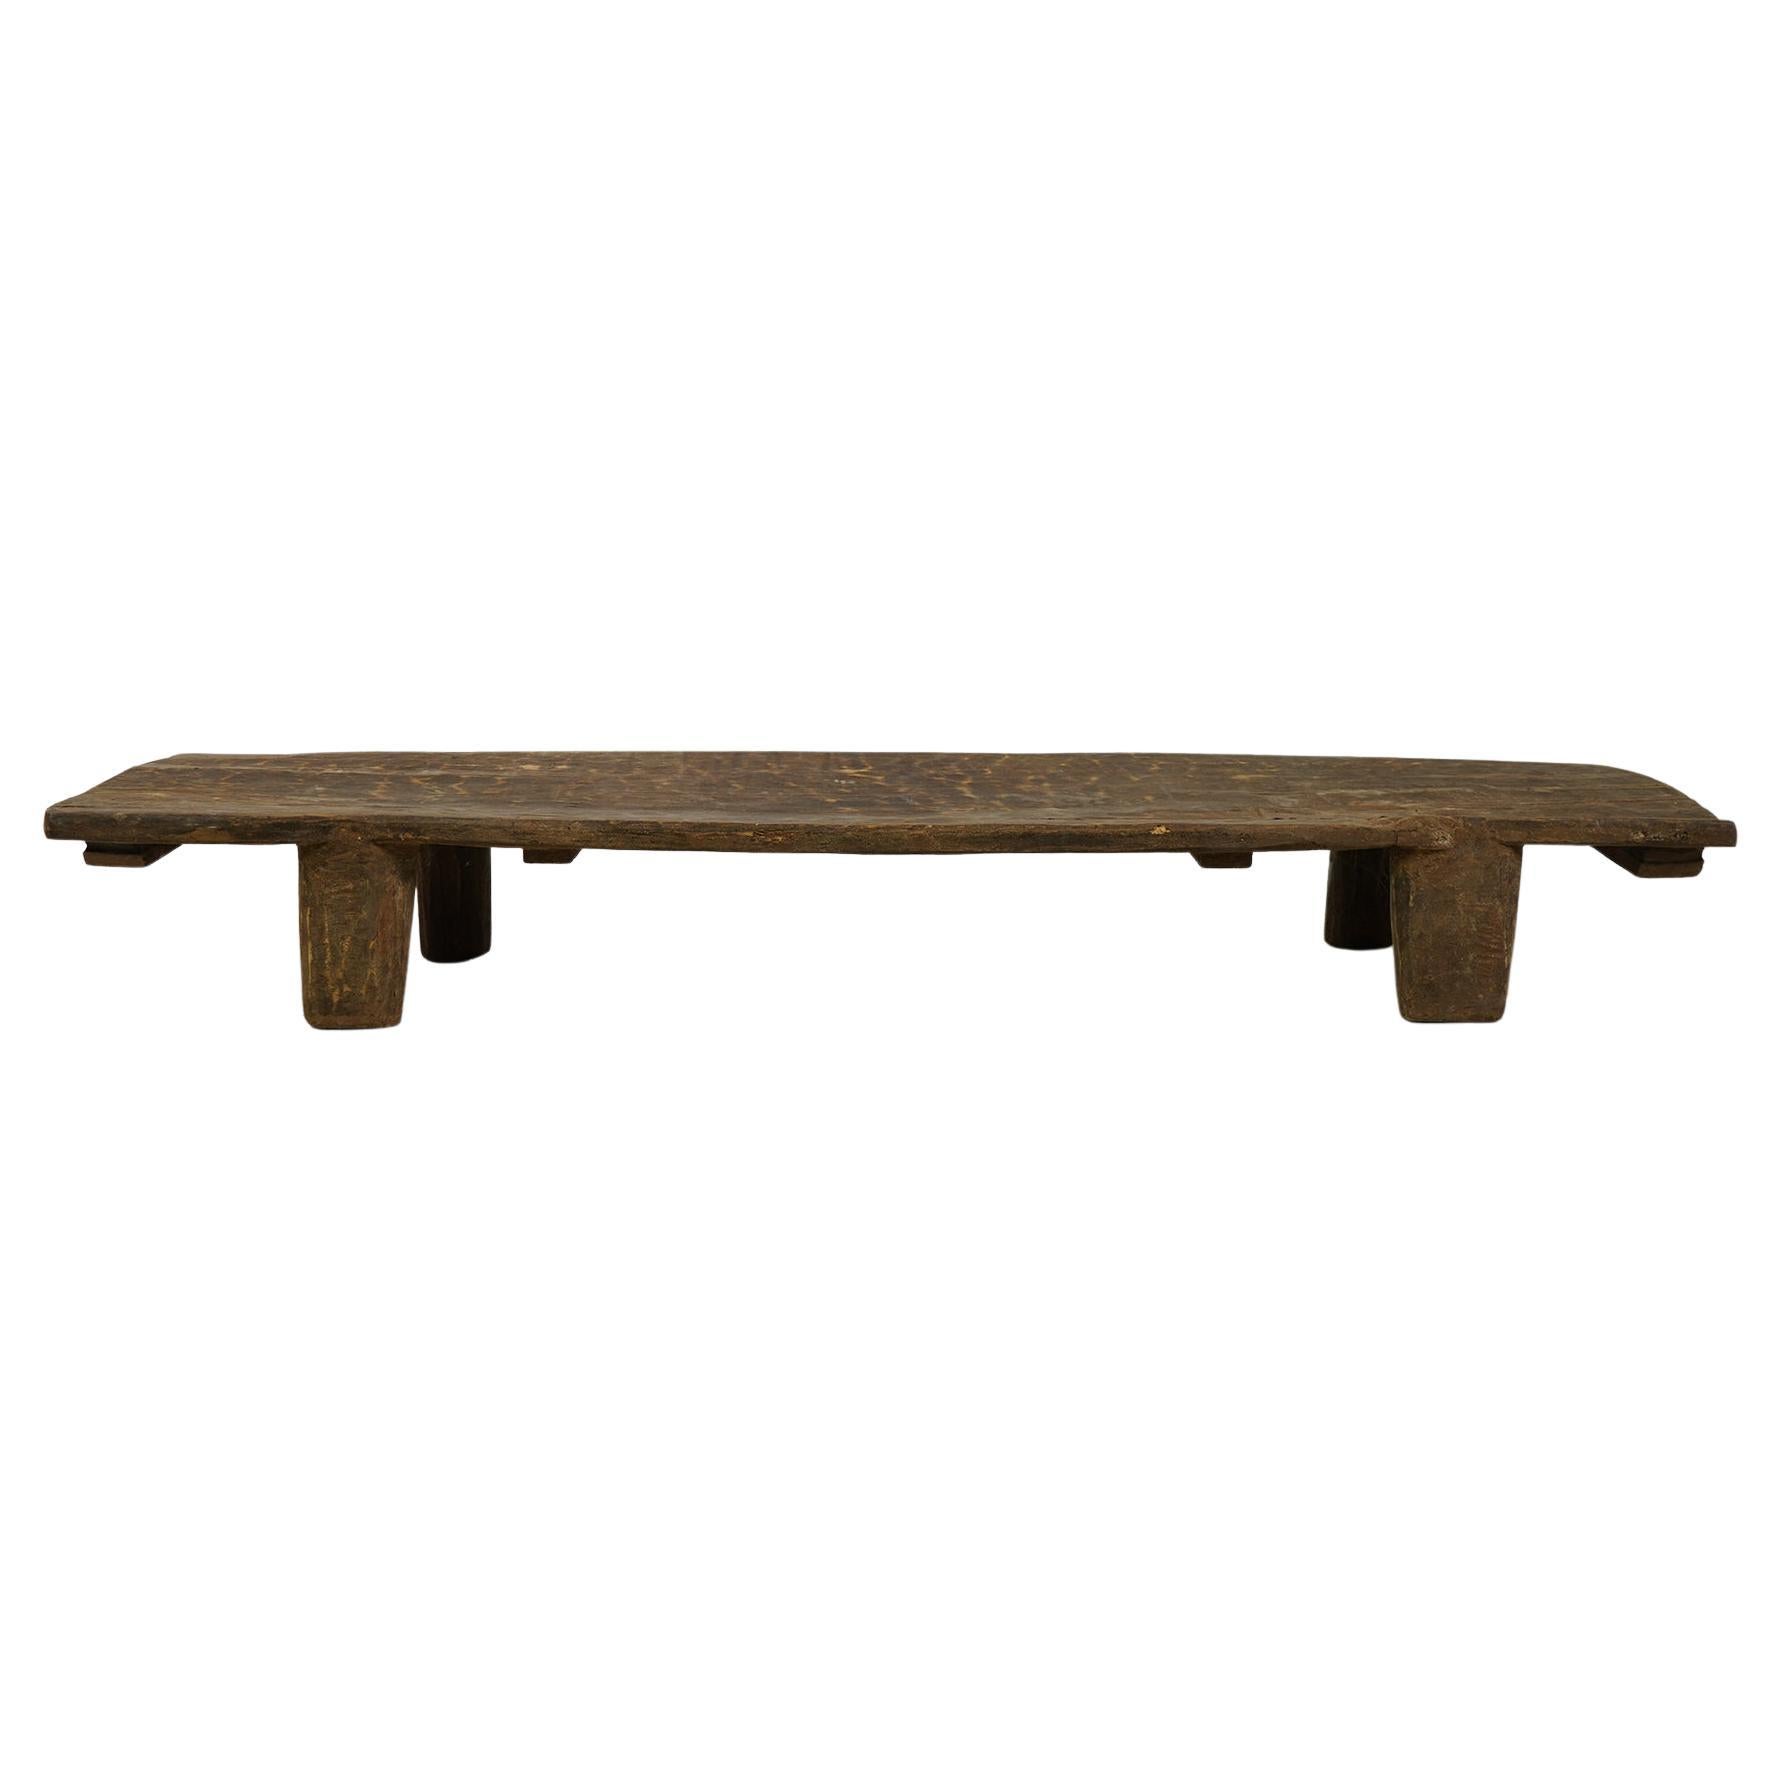 Rustic Naga Table or Bench, Hand Carved Wabi Sabi Style, Ancient Wood 'A'